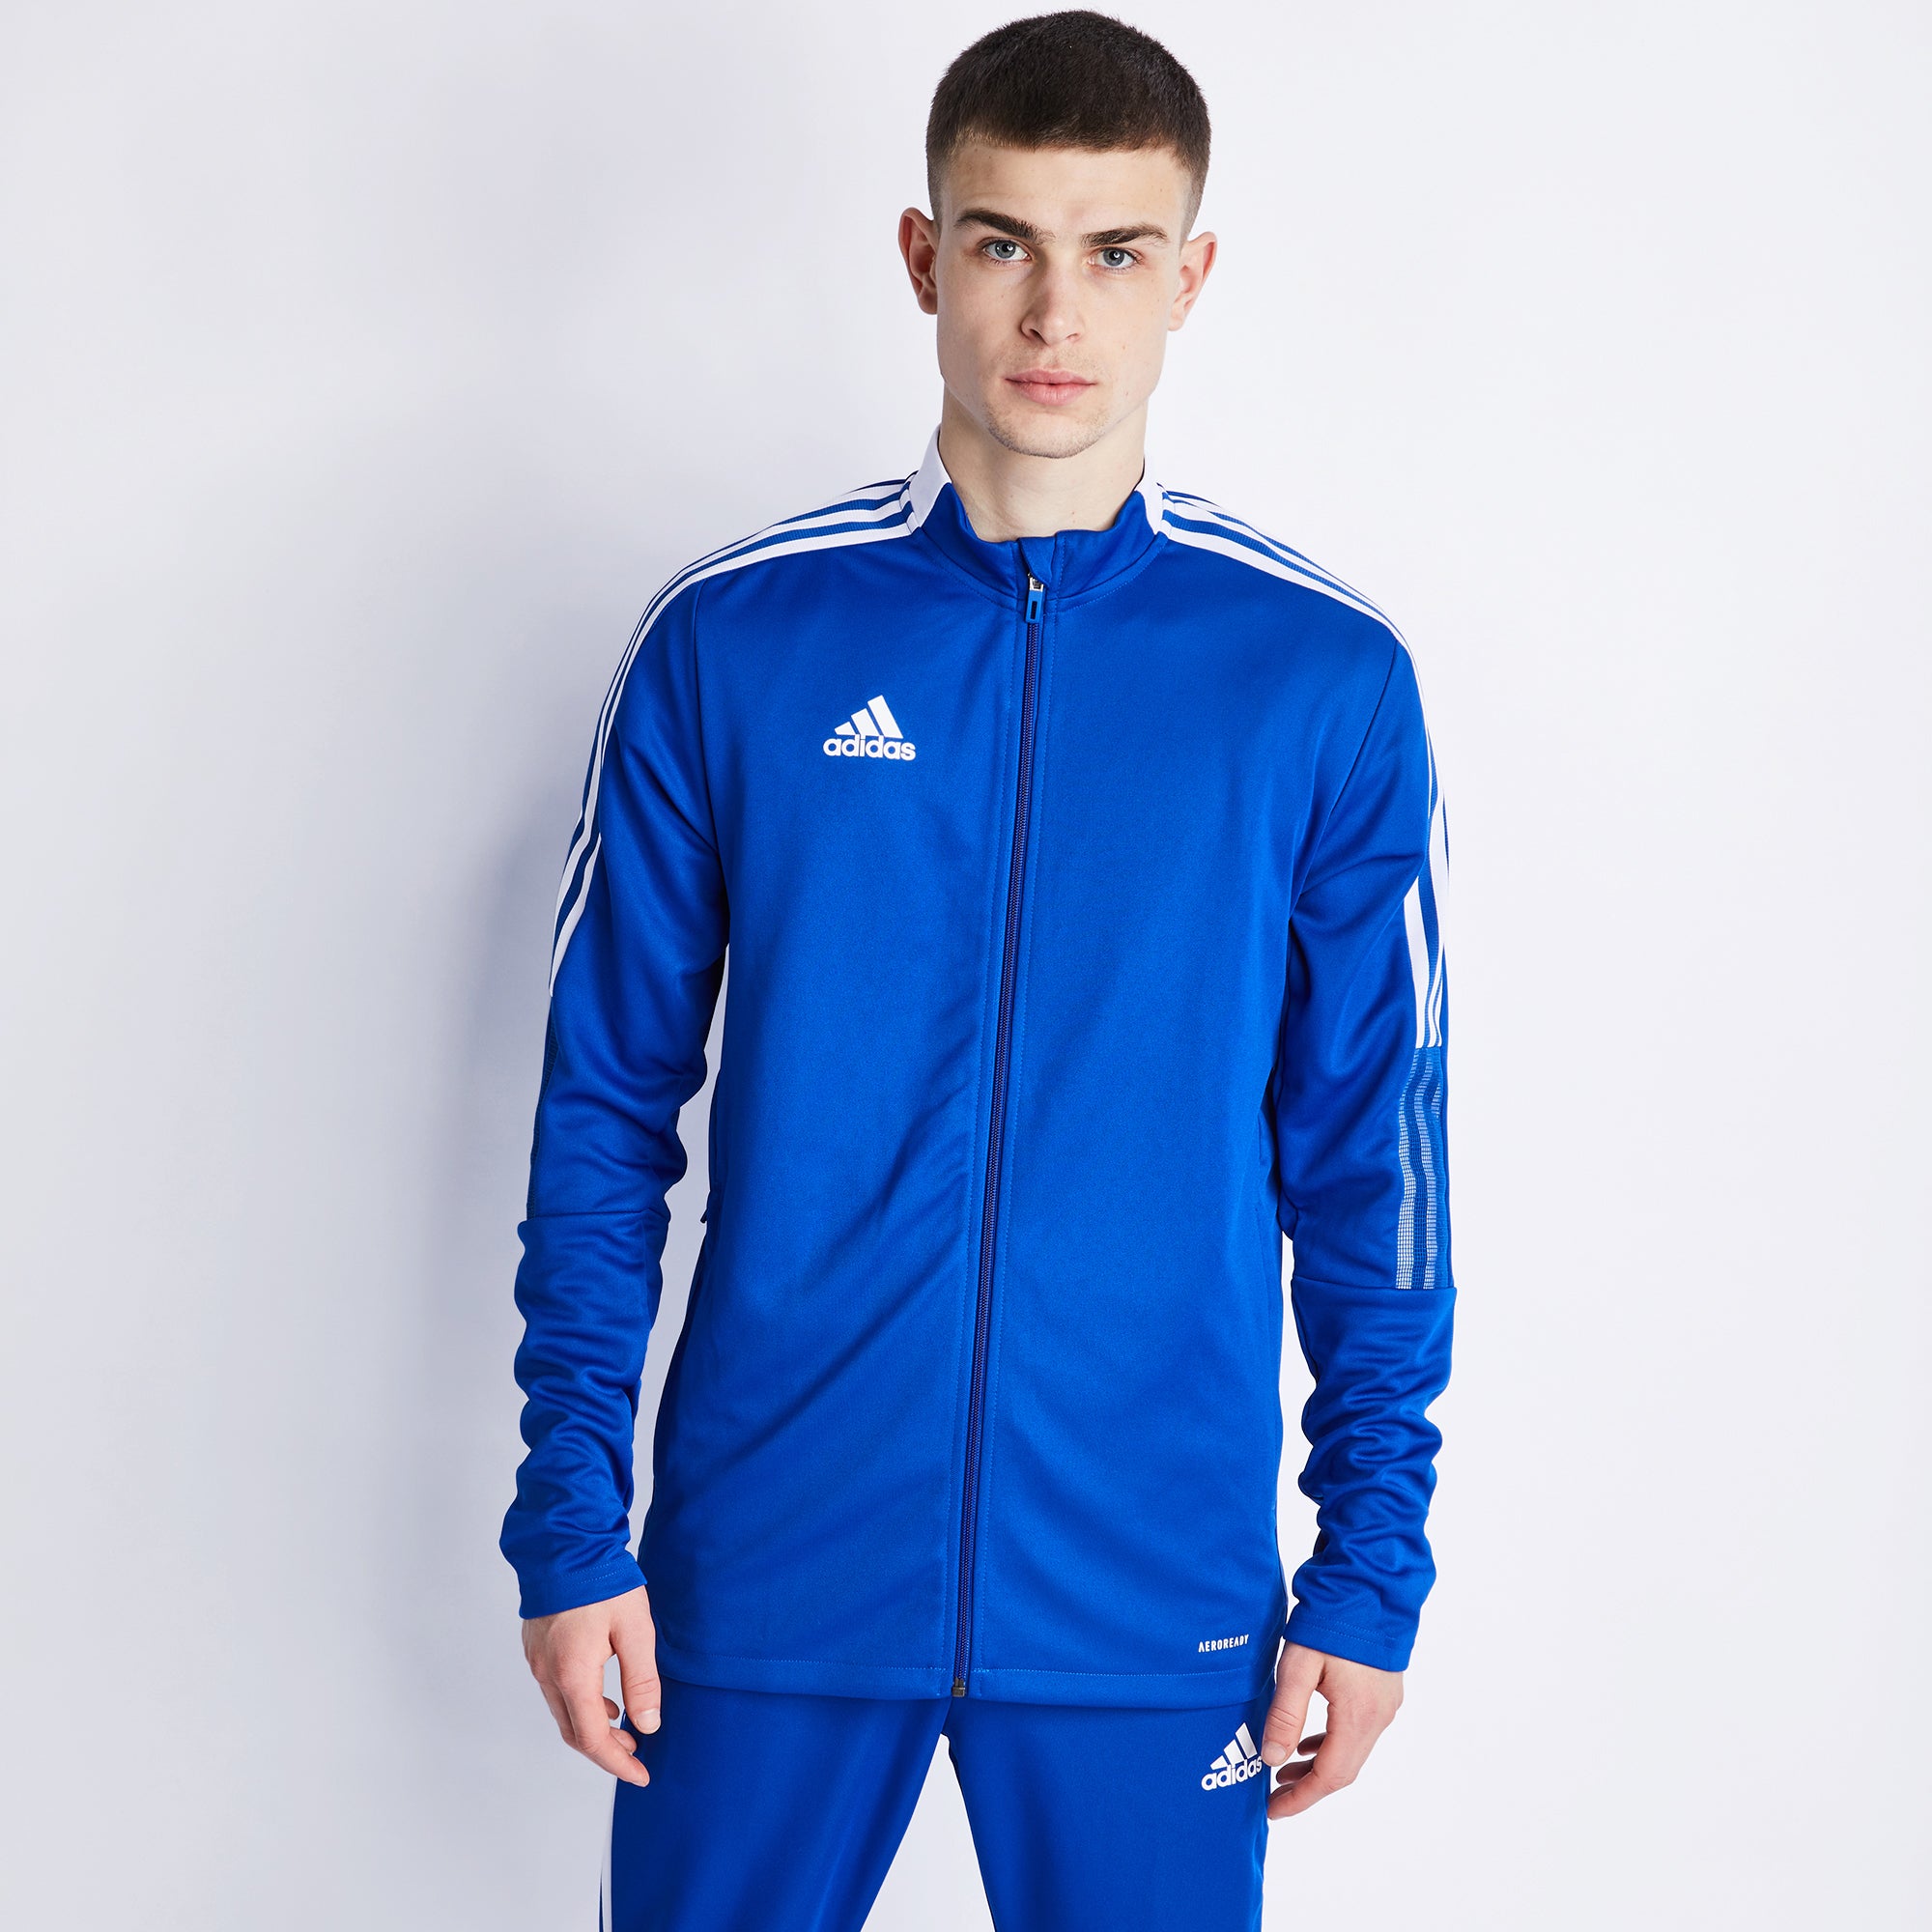 adidas Soccer Track Top